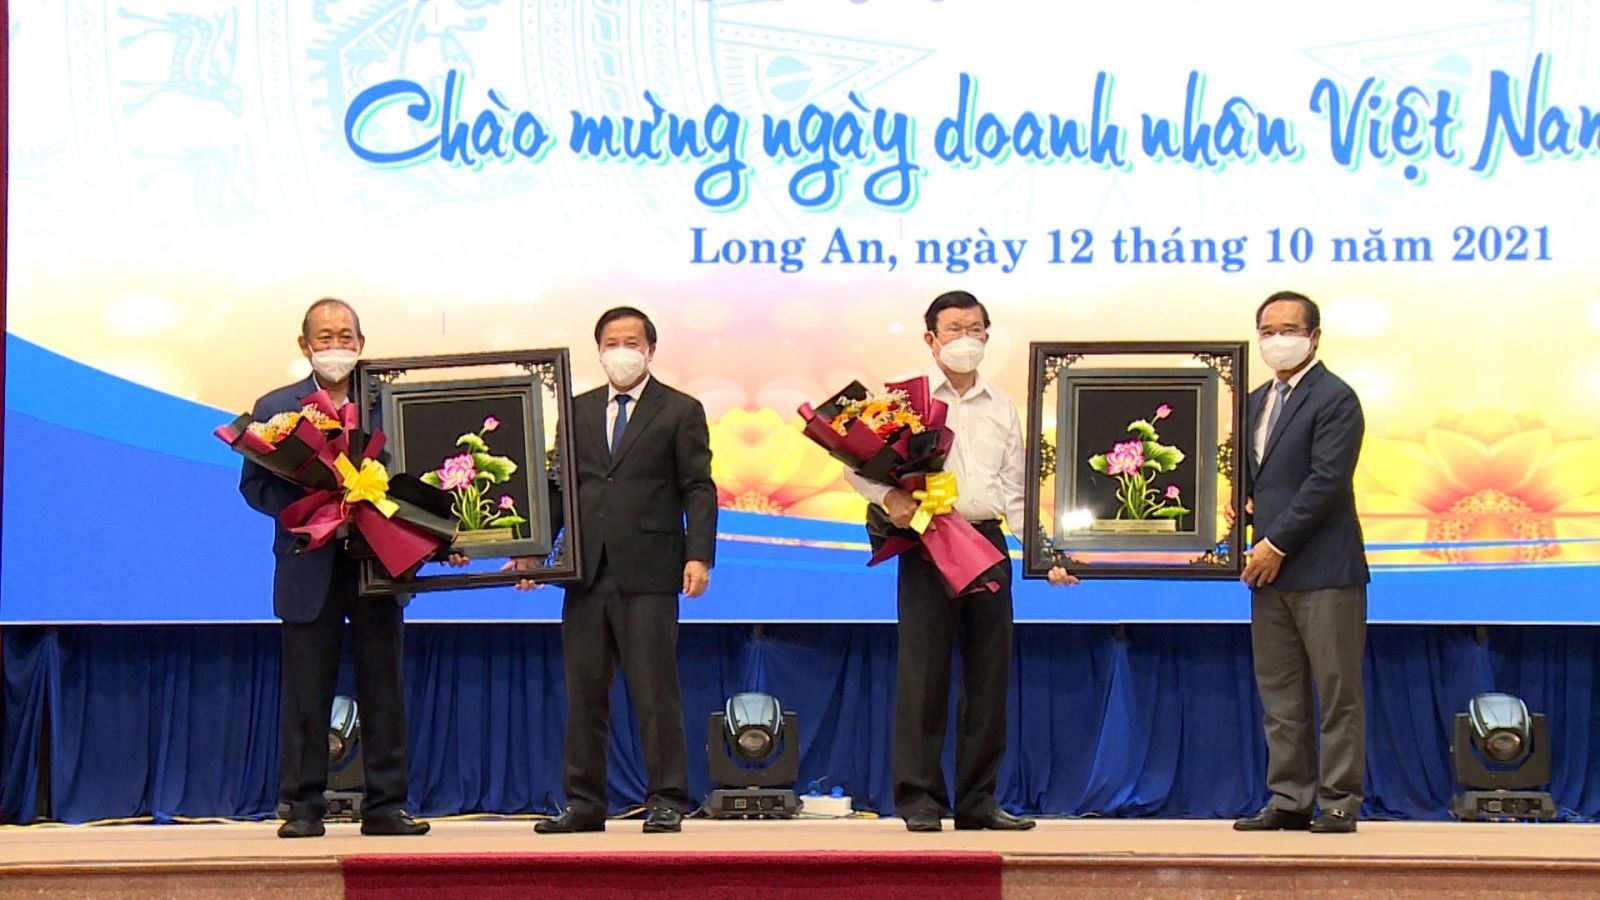 Leaders of Long An province pay tribute to former State President - Truong Tan Sang and former Deputy PM - Truong Hoa Binh